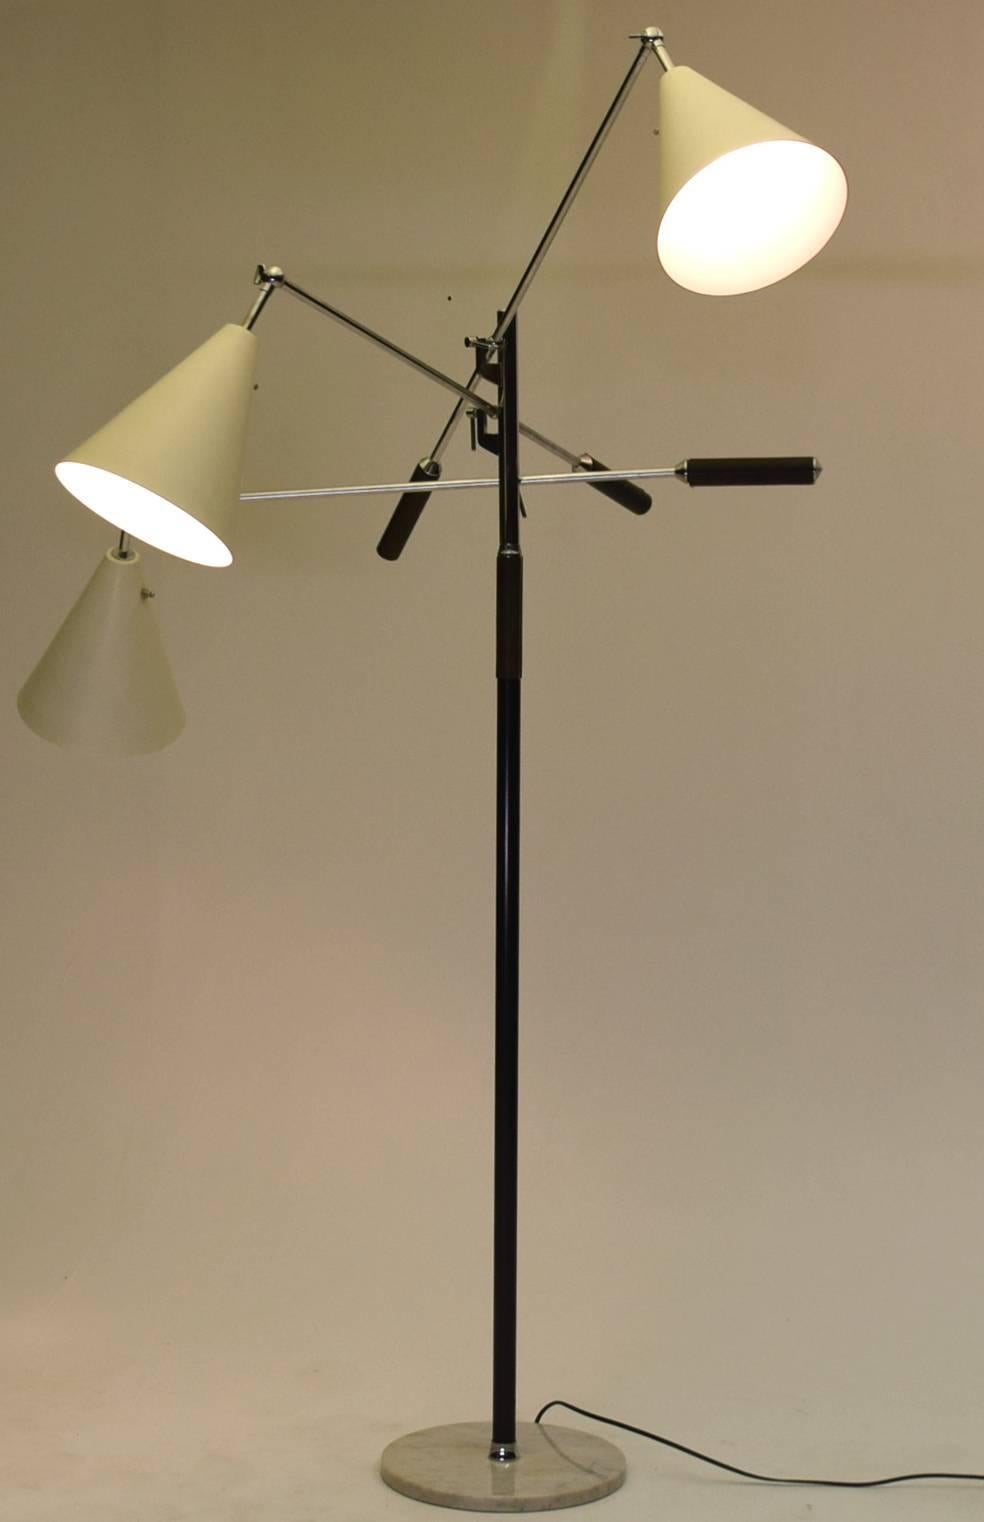 Three-arm floor lamp made in Italy. Stamped to base and stem. Iconic modern lighting with fully articulating arms.

Often referred to as the 